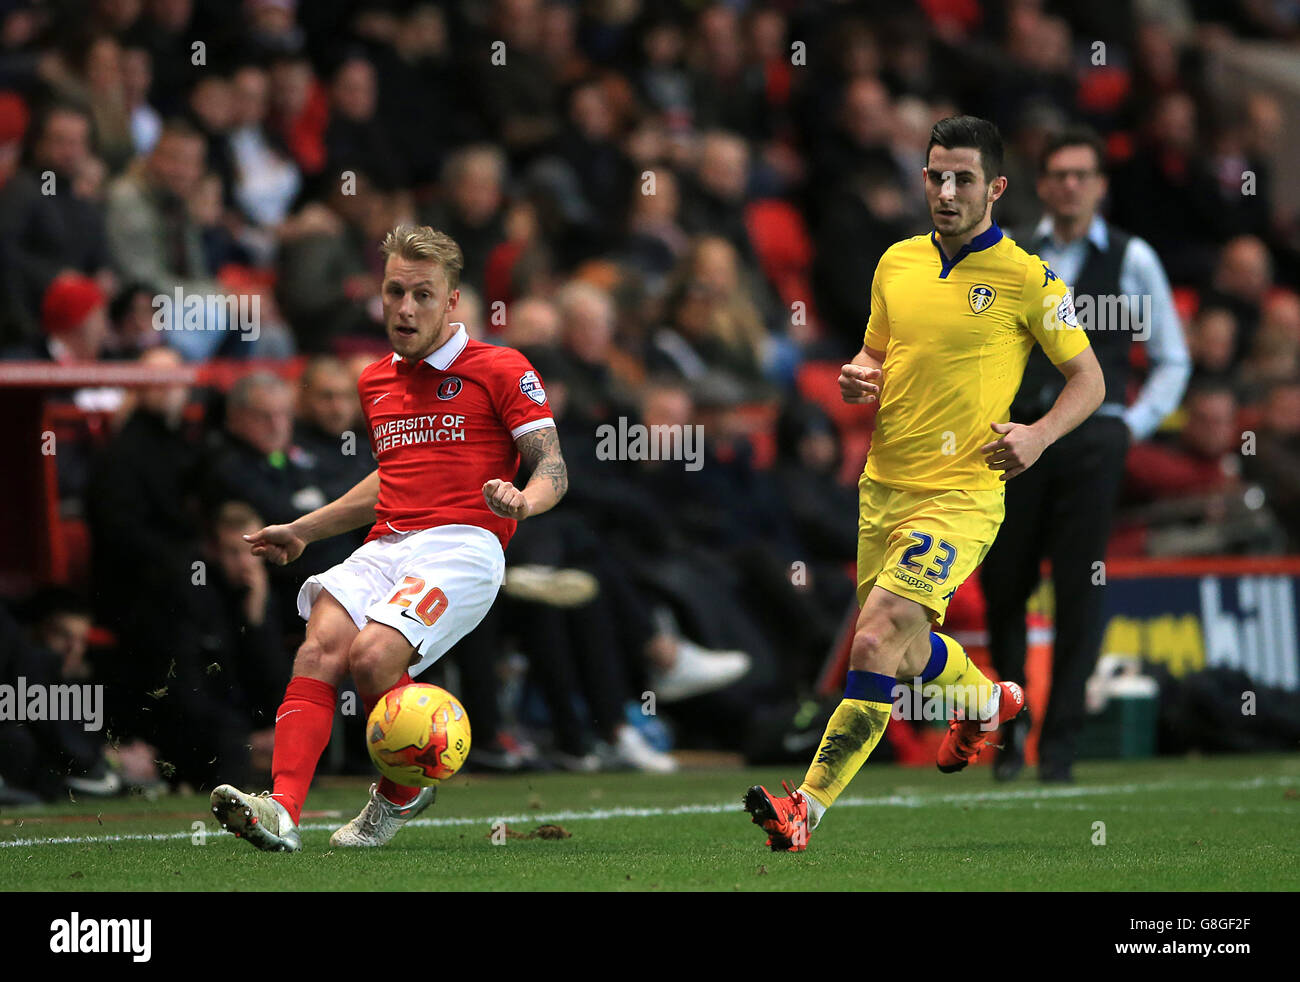 Charlton Athletic / Leeds United - Sky Bet Championship - The Valley. Chris Solly di Charlton Athletic e Lewis Cook (a destra) del Leeds United in azione Foto Stock